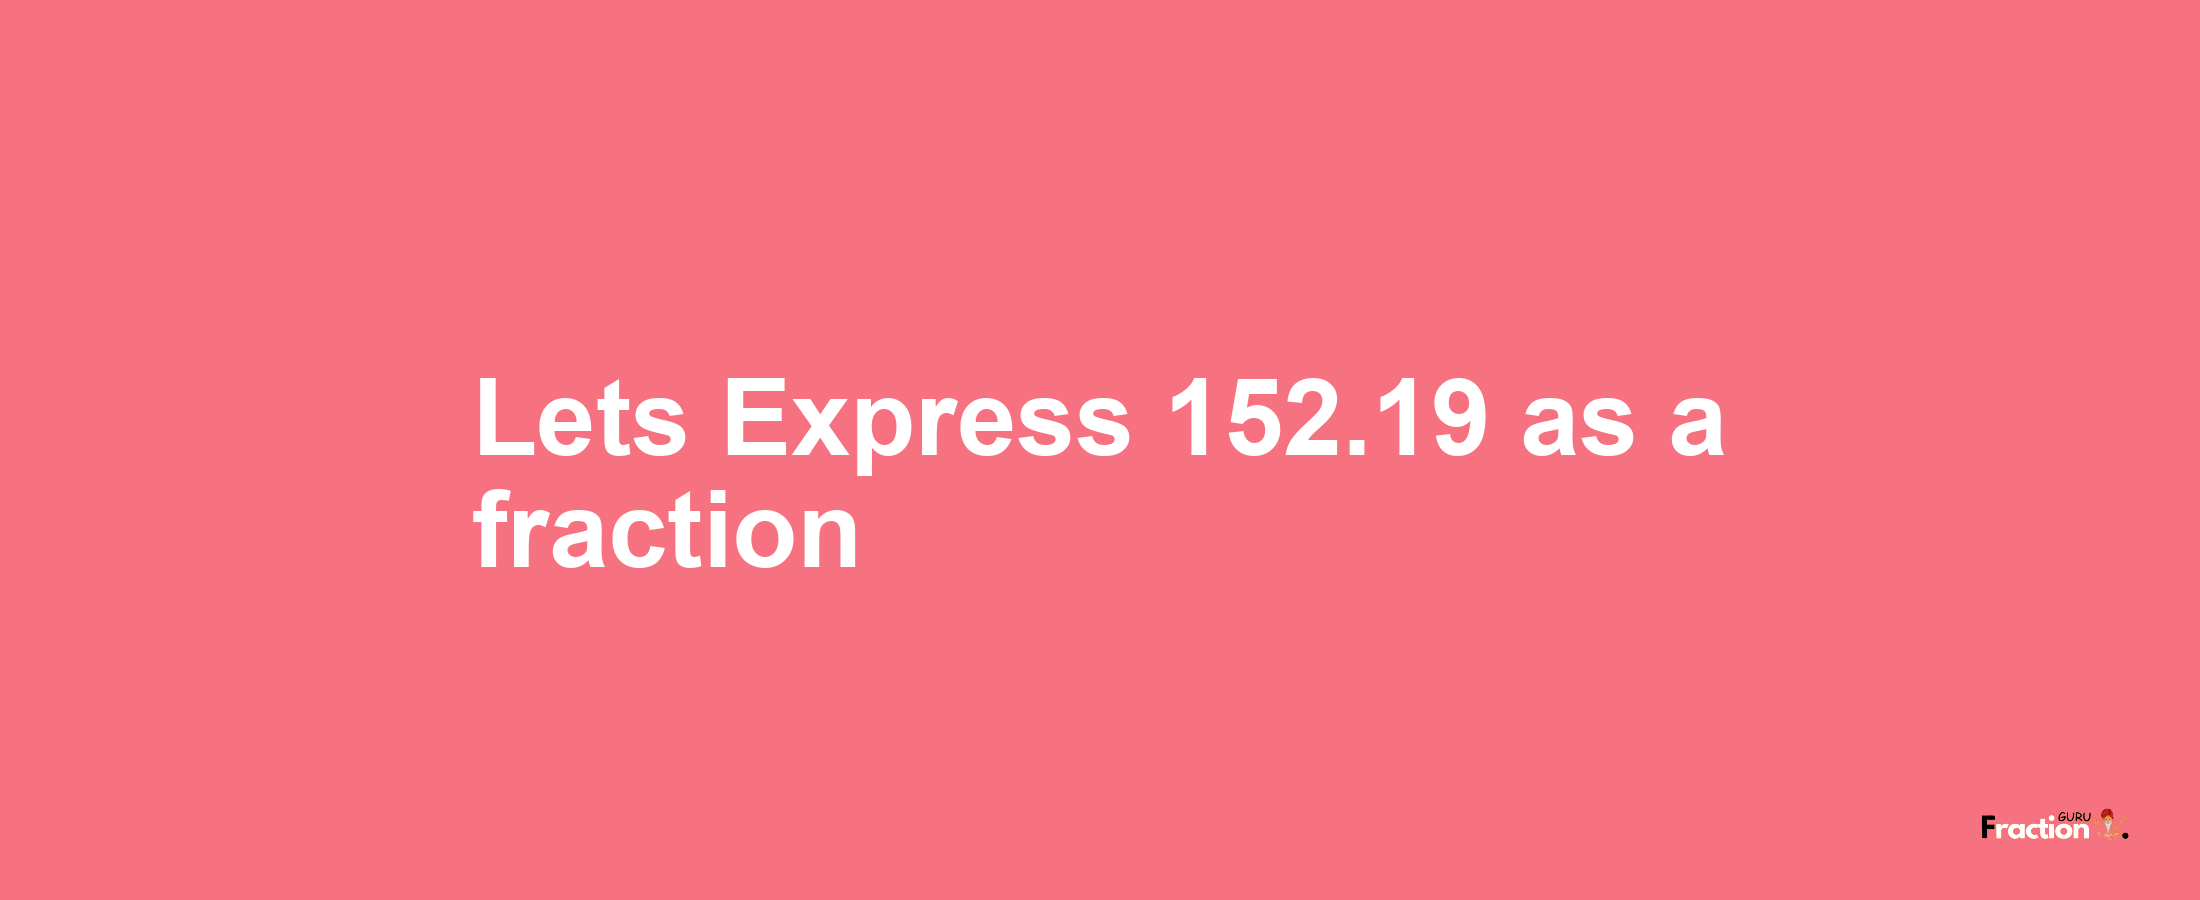 Lets Express 152.19 as afraction